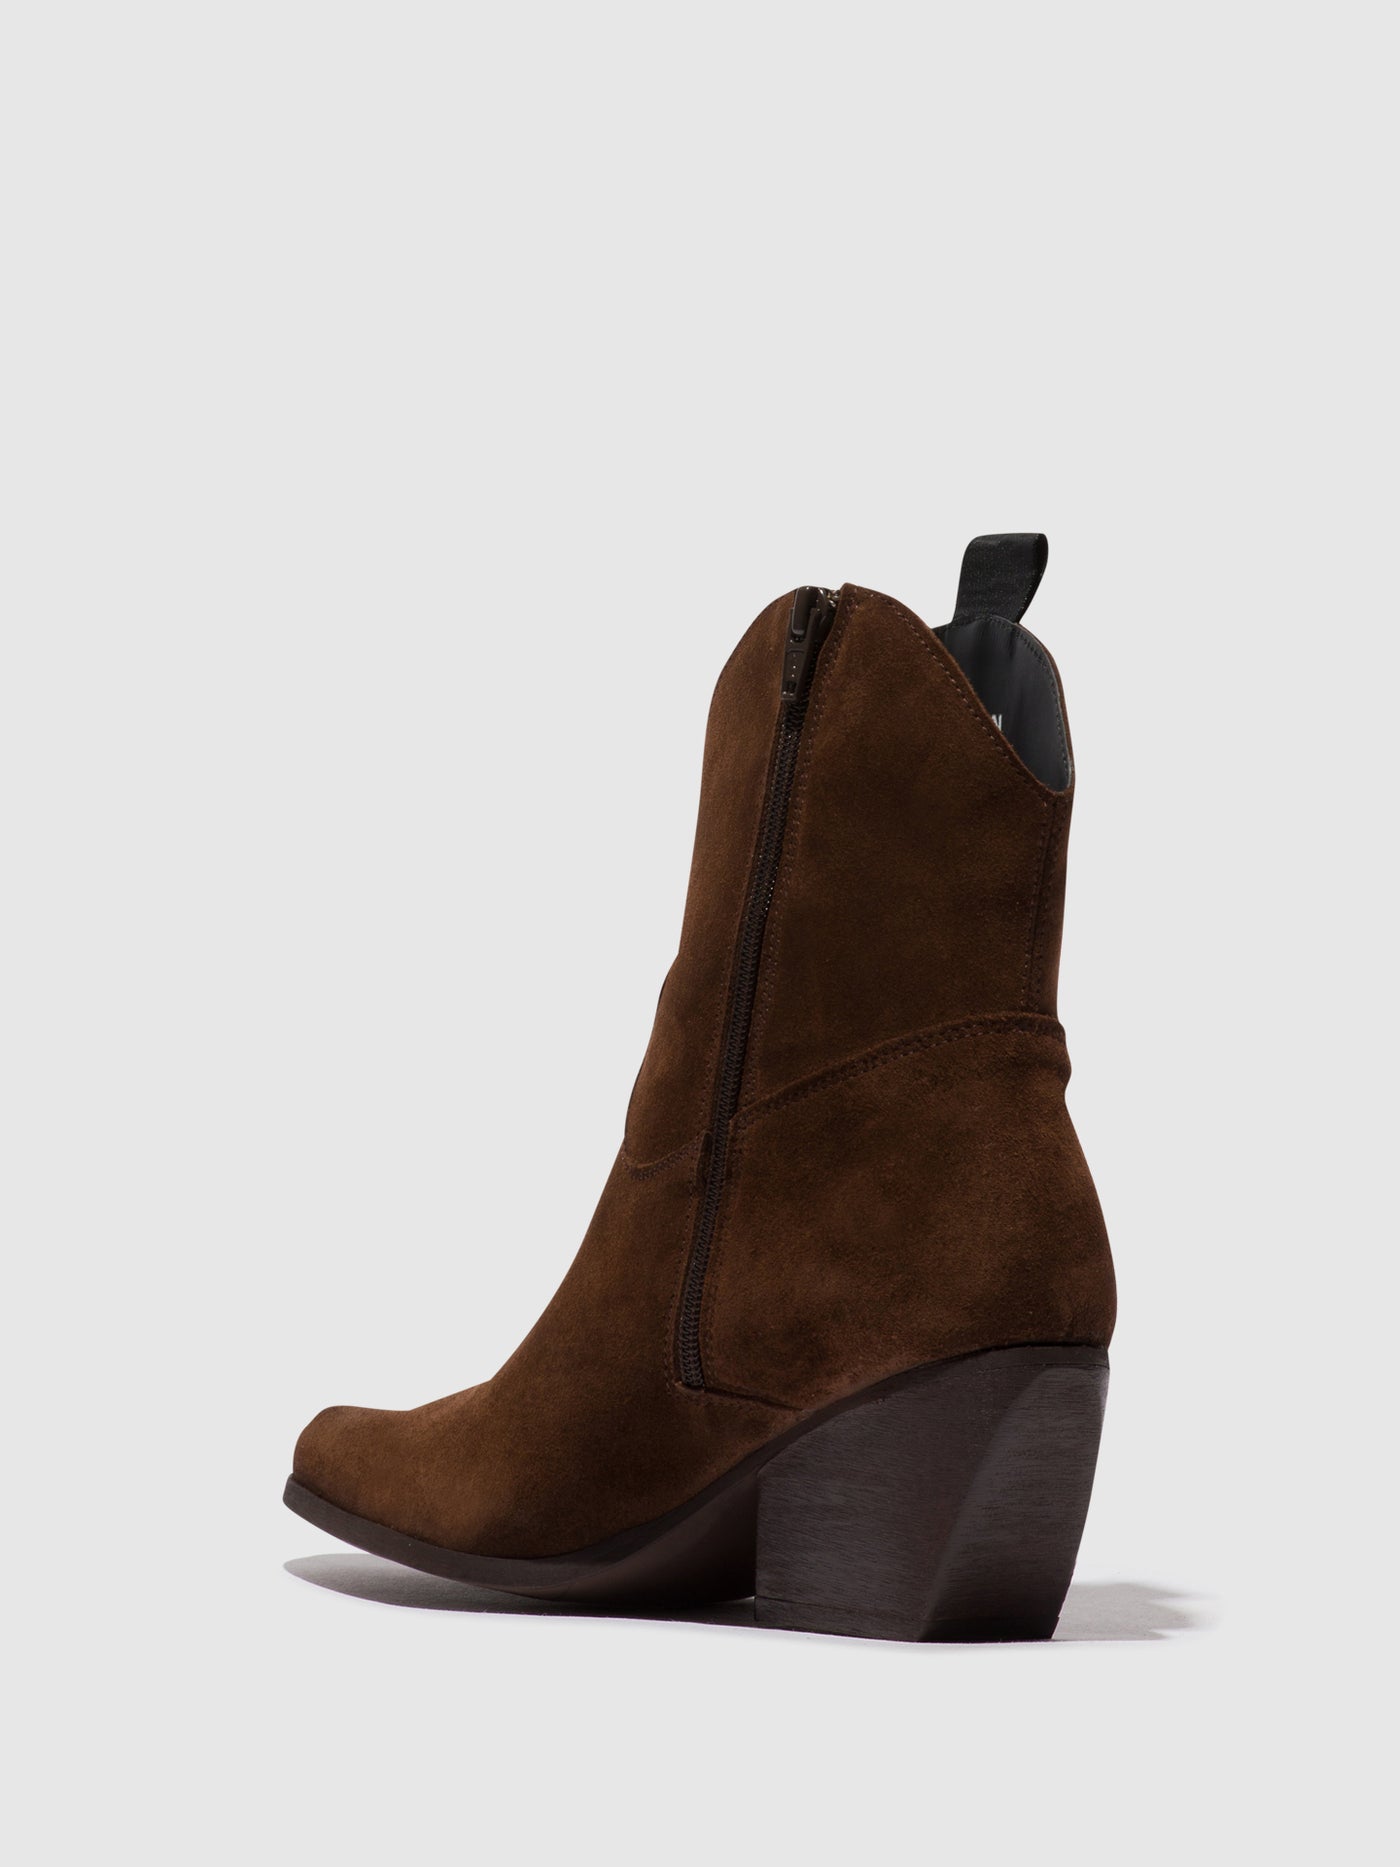 Zip Up Ankle Boots TABB905FLY CHOCOLATE